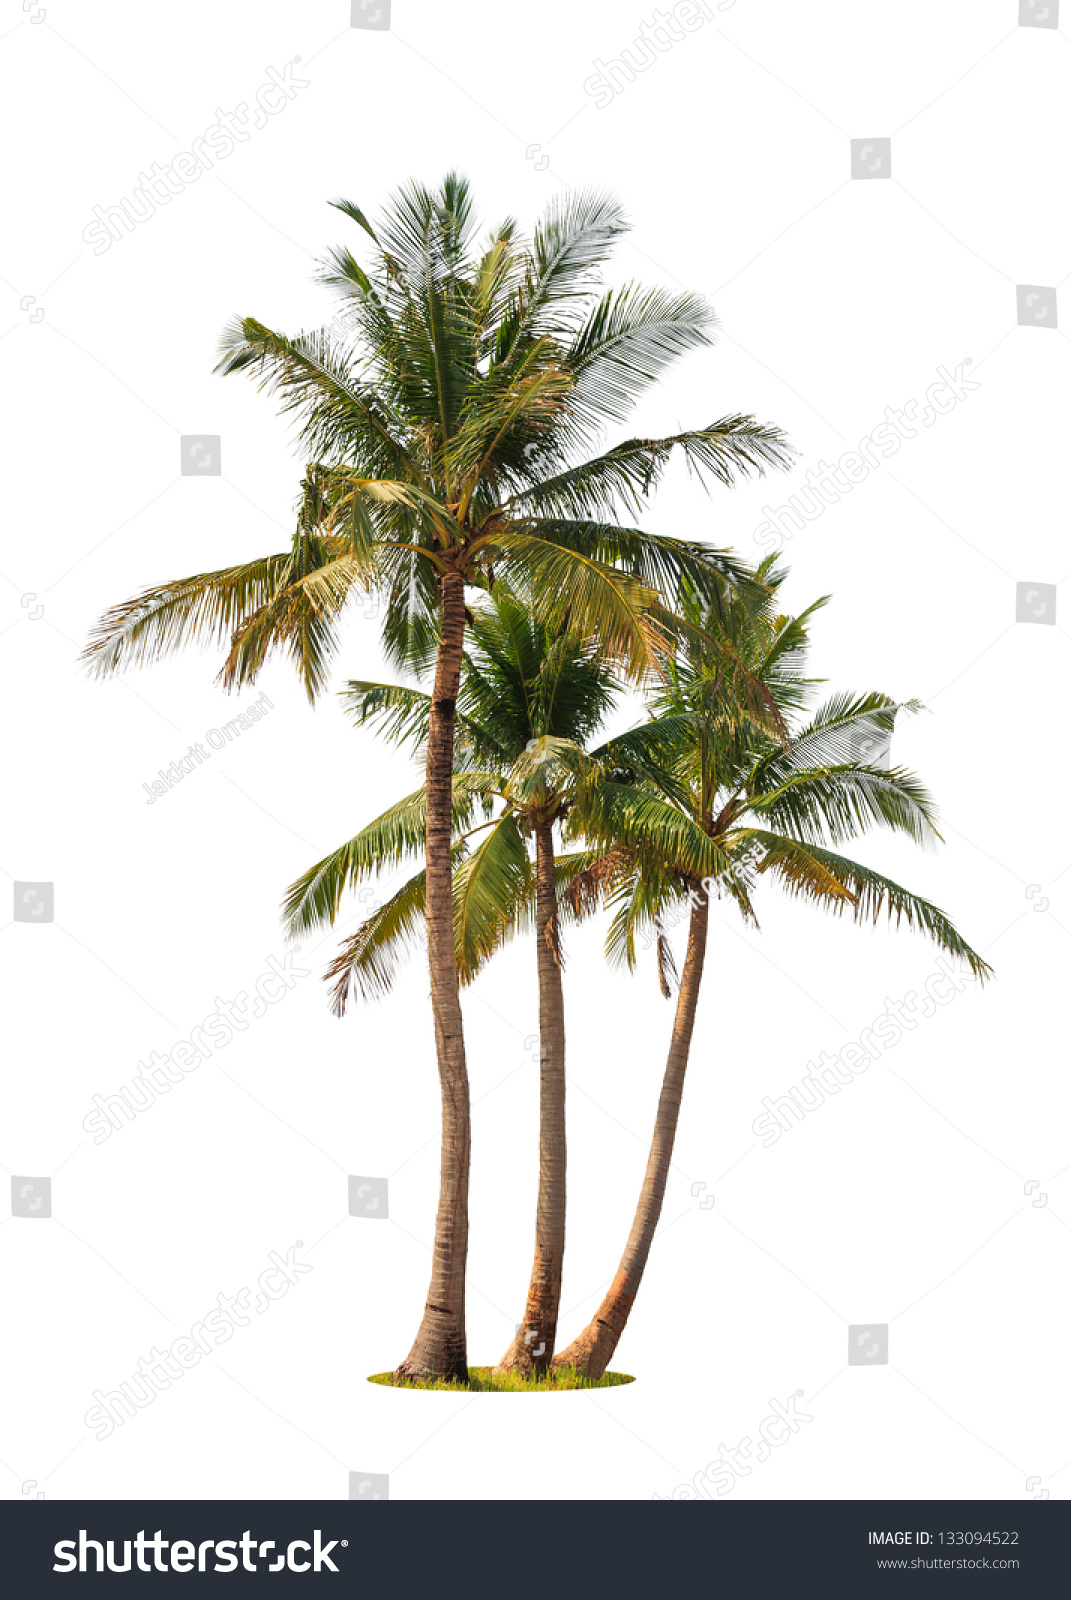 Three coconut palm trees isolated on white background #133094522